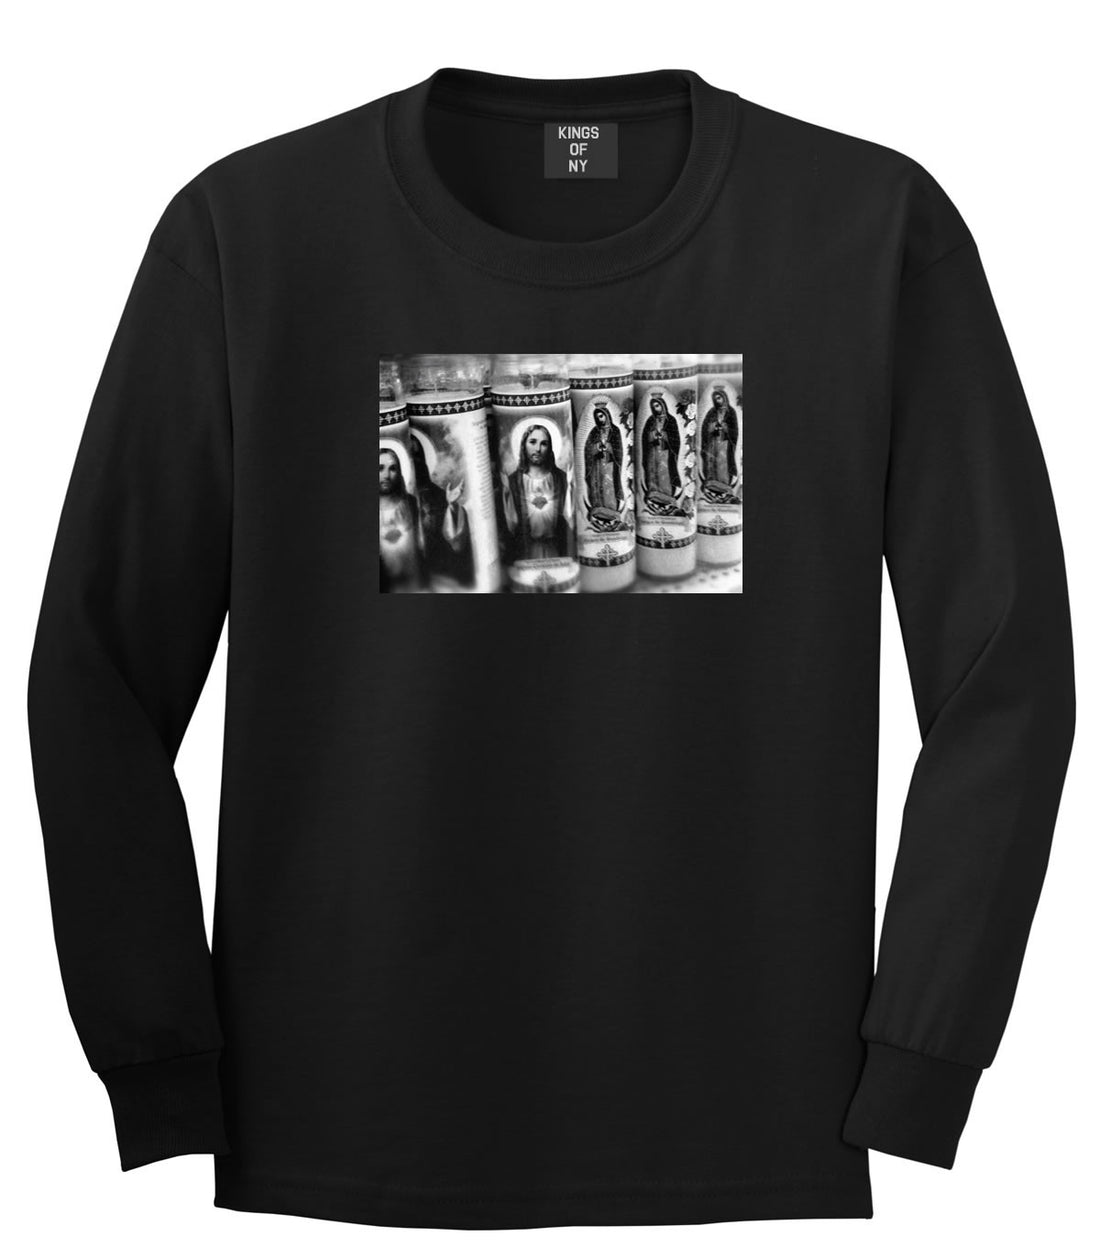 Candles Religious God Jesus Mary Fire NYC Long Sleeve T-Shirt In Black by Kings Of NY